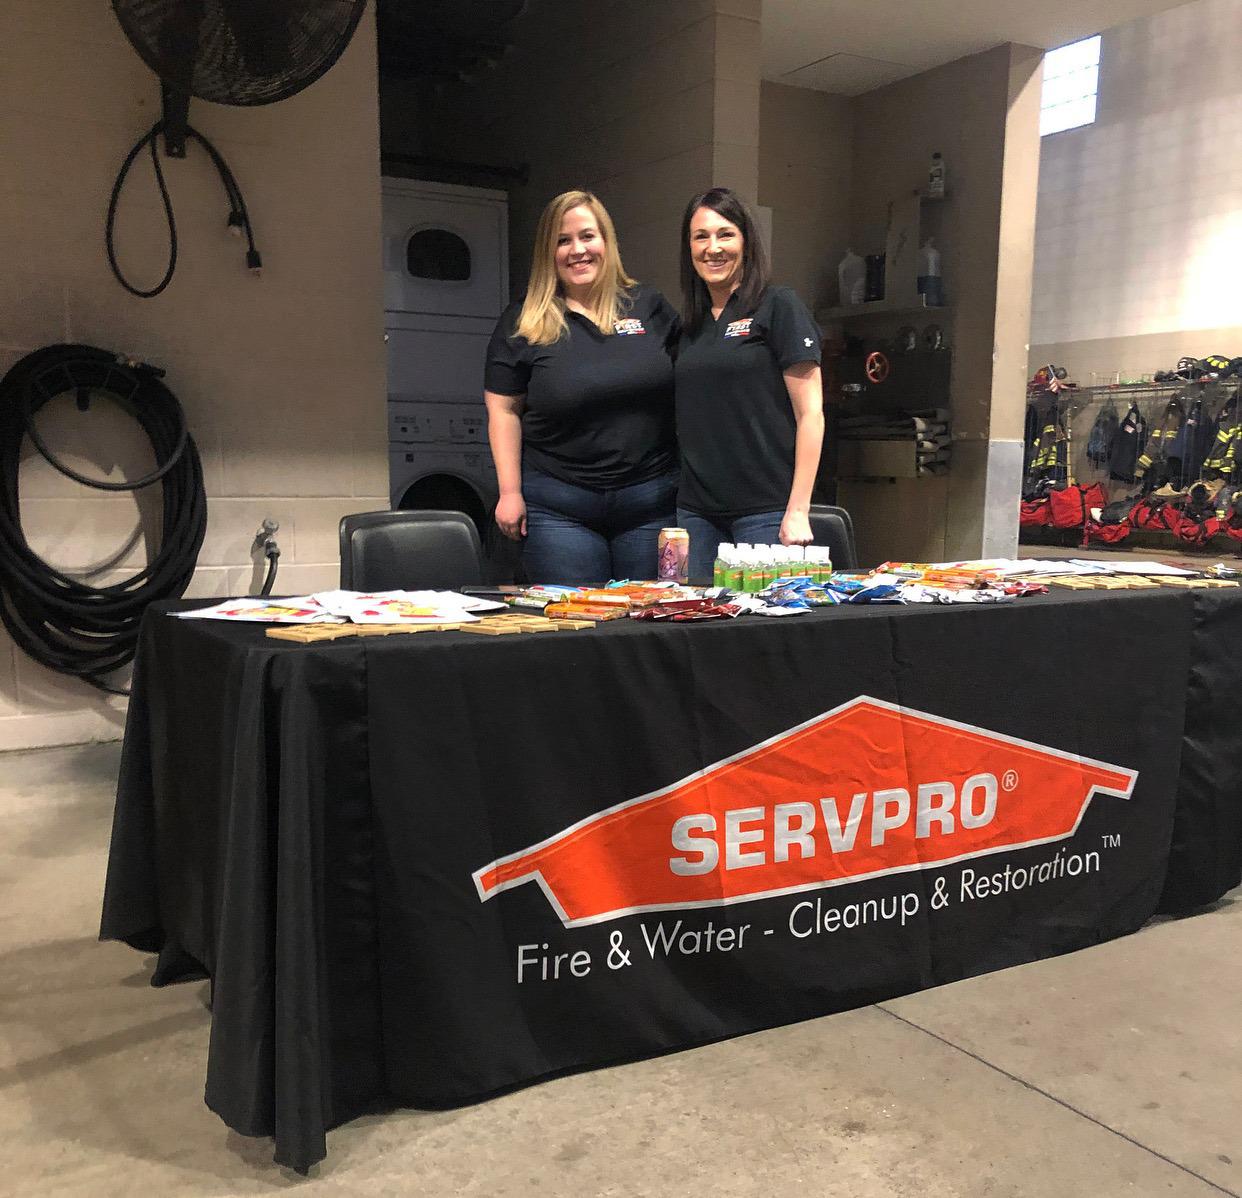 We handed out snacks, refreshments, and SERVPRO coloring books at the Clayton Fire Department movie night on Saturday and had so much fun! Thank you to the Clayton Fire Department for having us! #SERVPRO